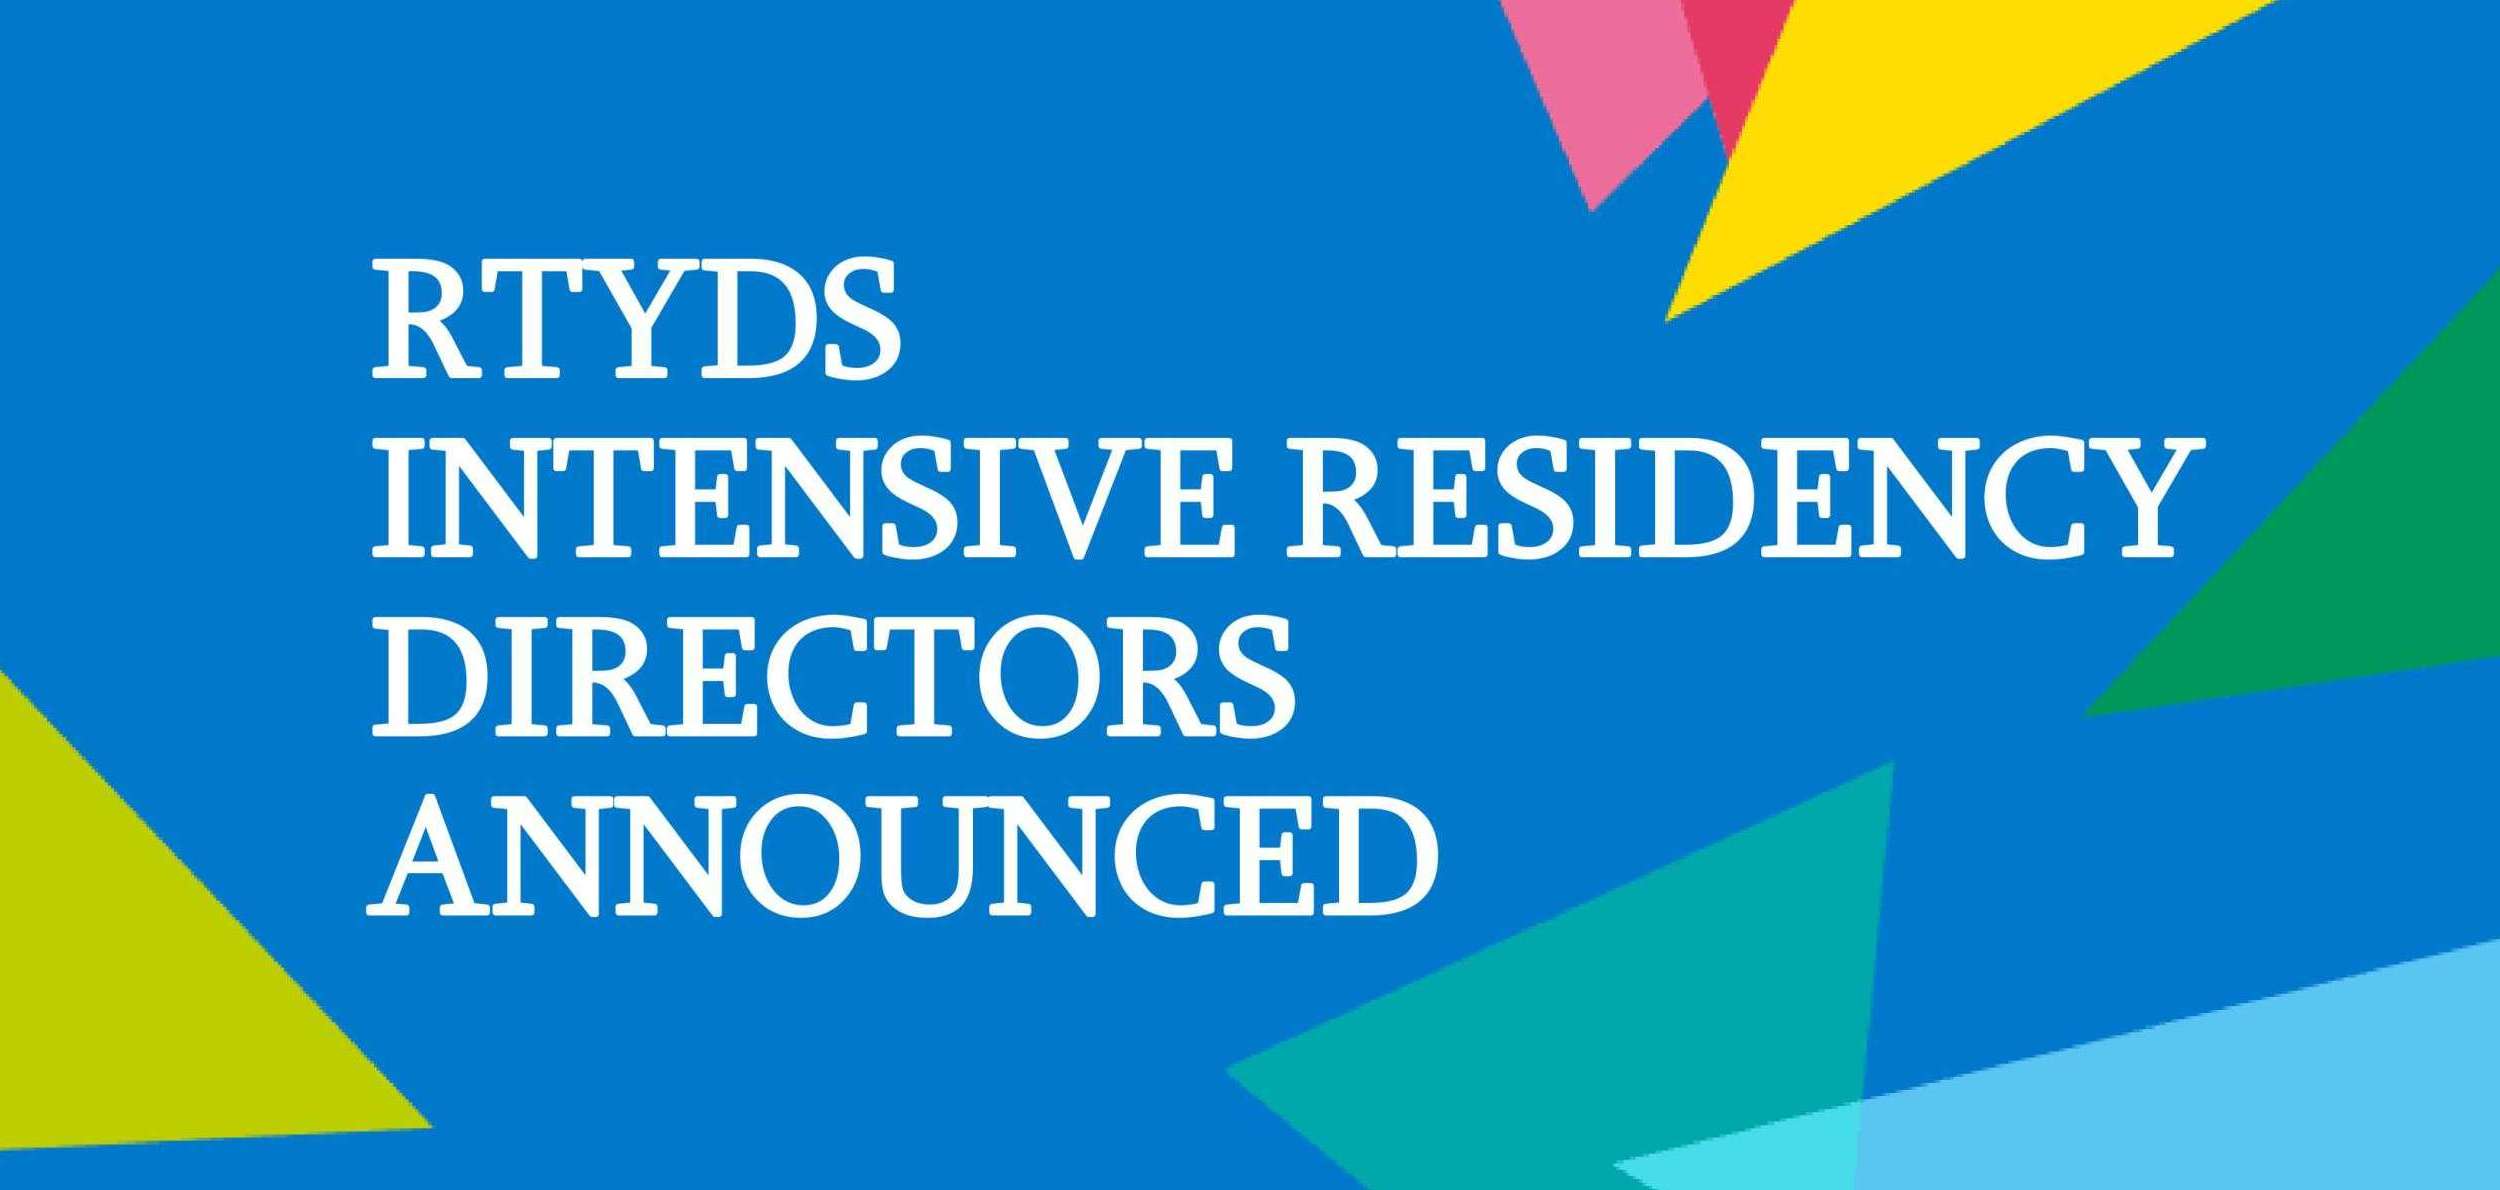 Image reads "RTYDS Intensive Residency directors announced"